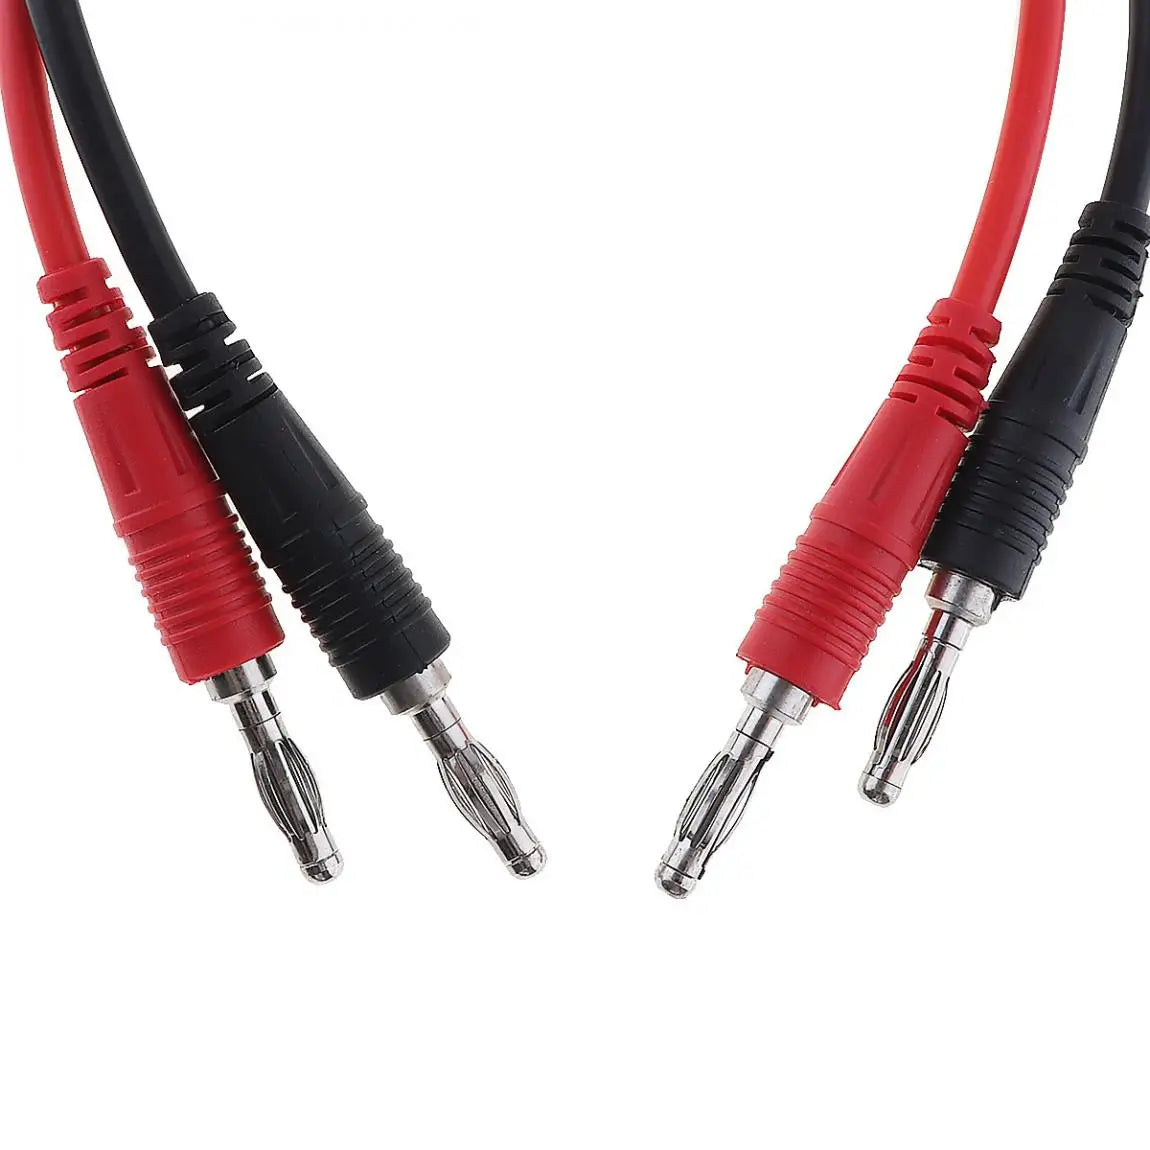 2pcs 4mm Banana Plug Cord to Test Hook Clip Probe Cable Leads Cable